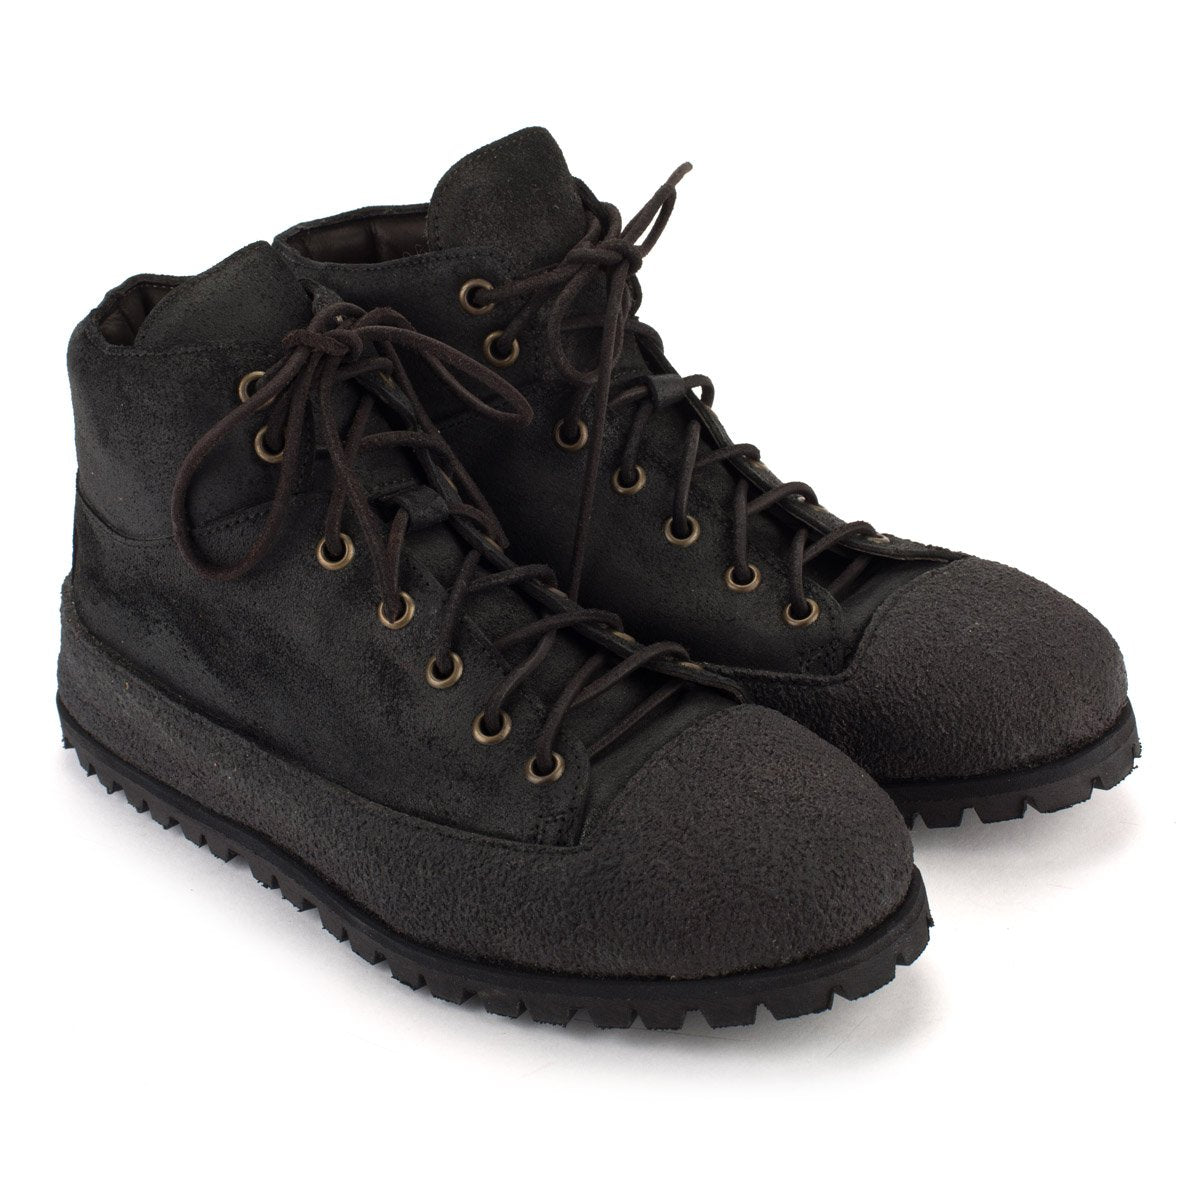 CR 24 WATER PROOF SUEDE BOOTS – Black